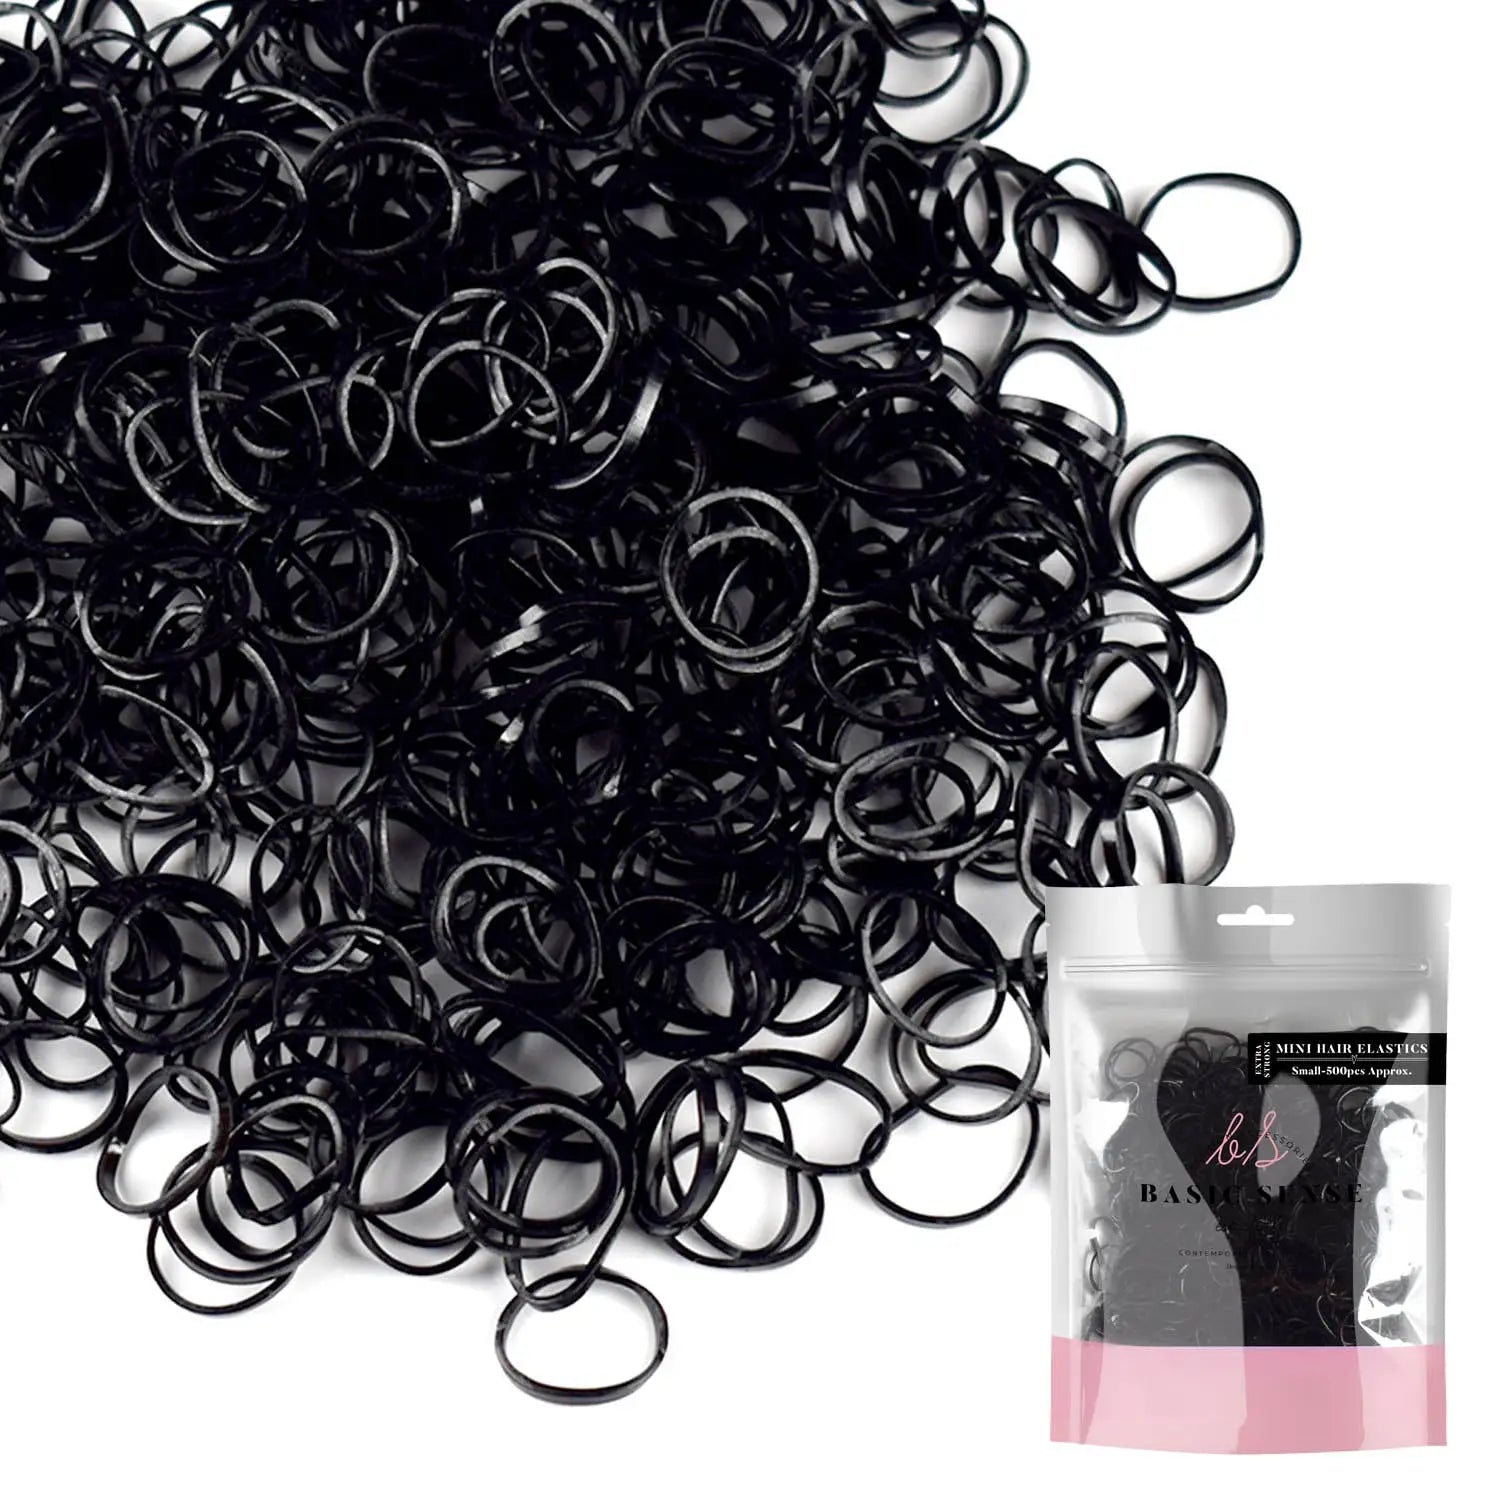 Extra Strong Mini Rubber Bands - Versatile Hair Styling Options